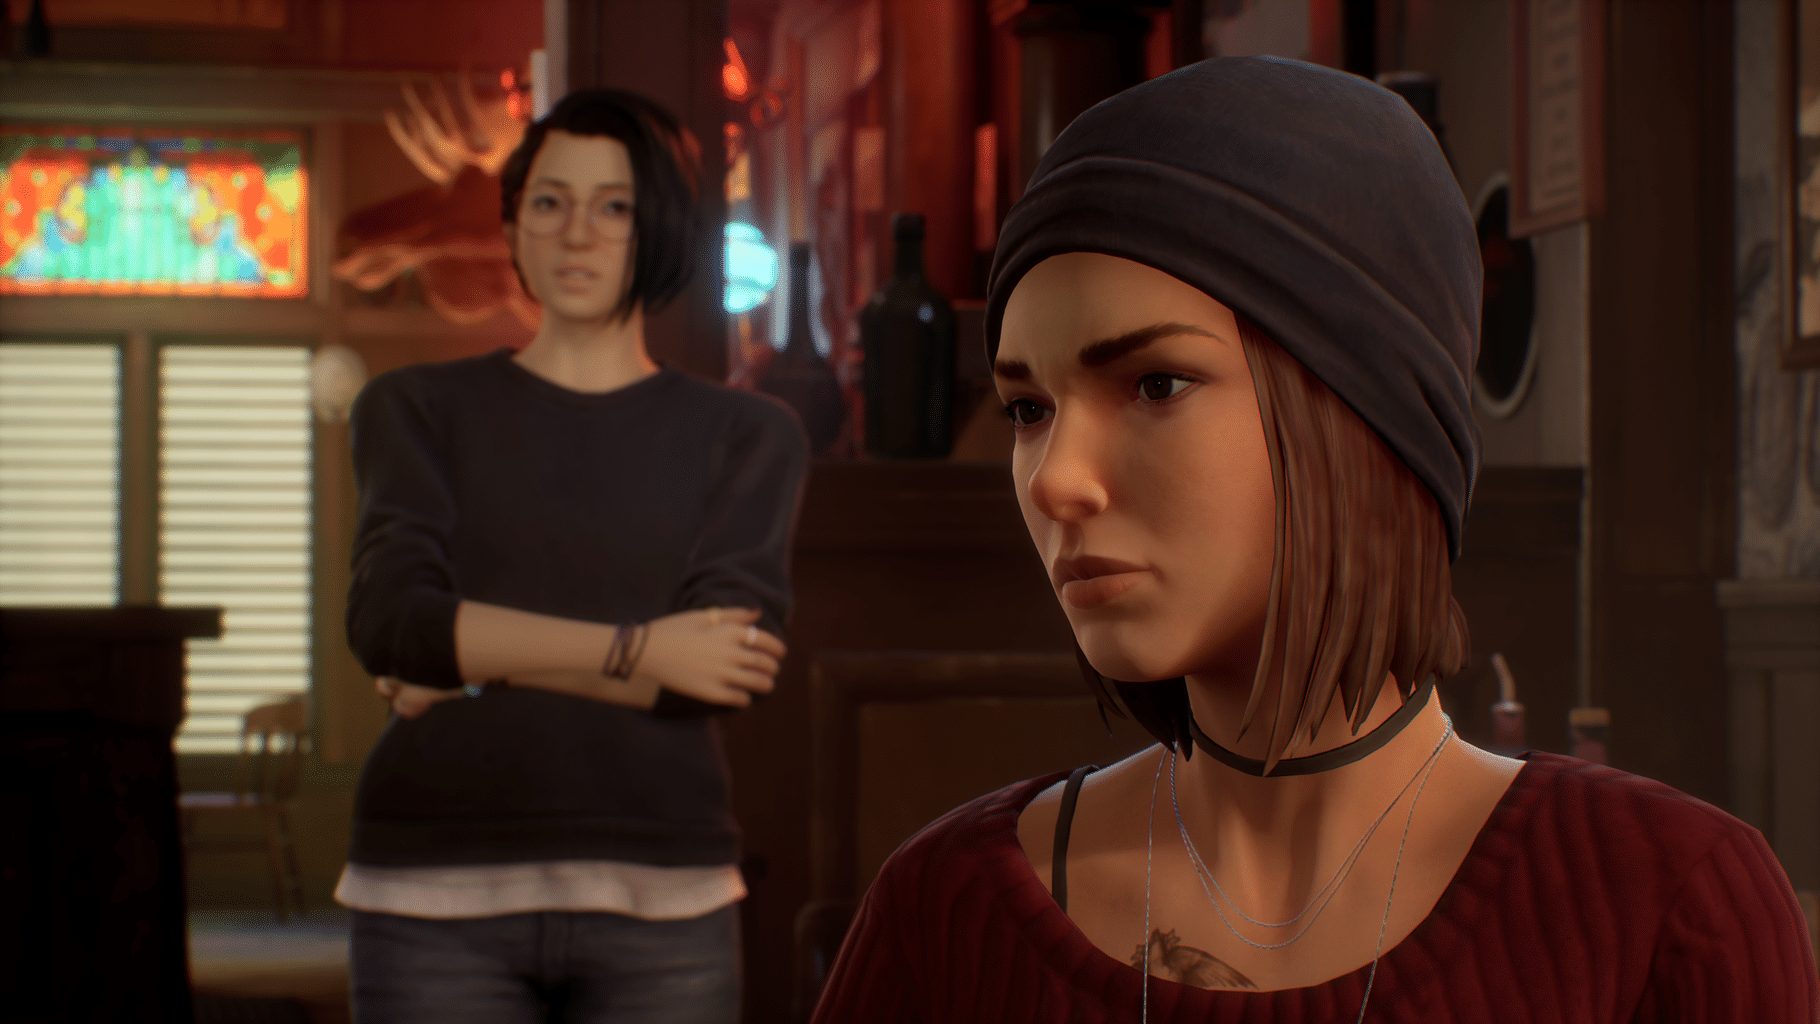 Will Life is Strange: True Colors release on Xbox Game Pass